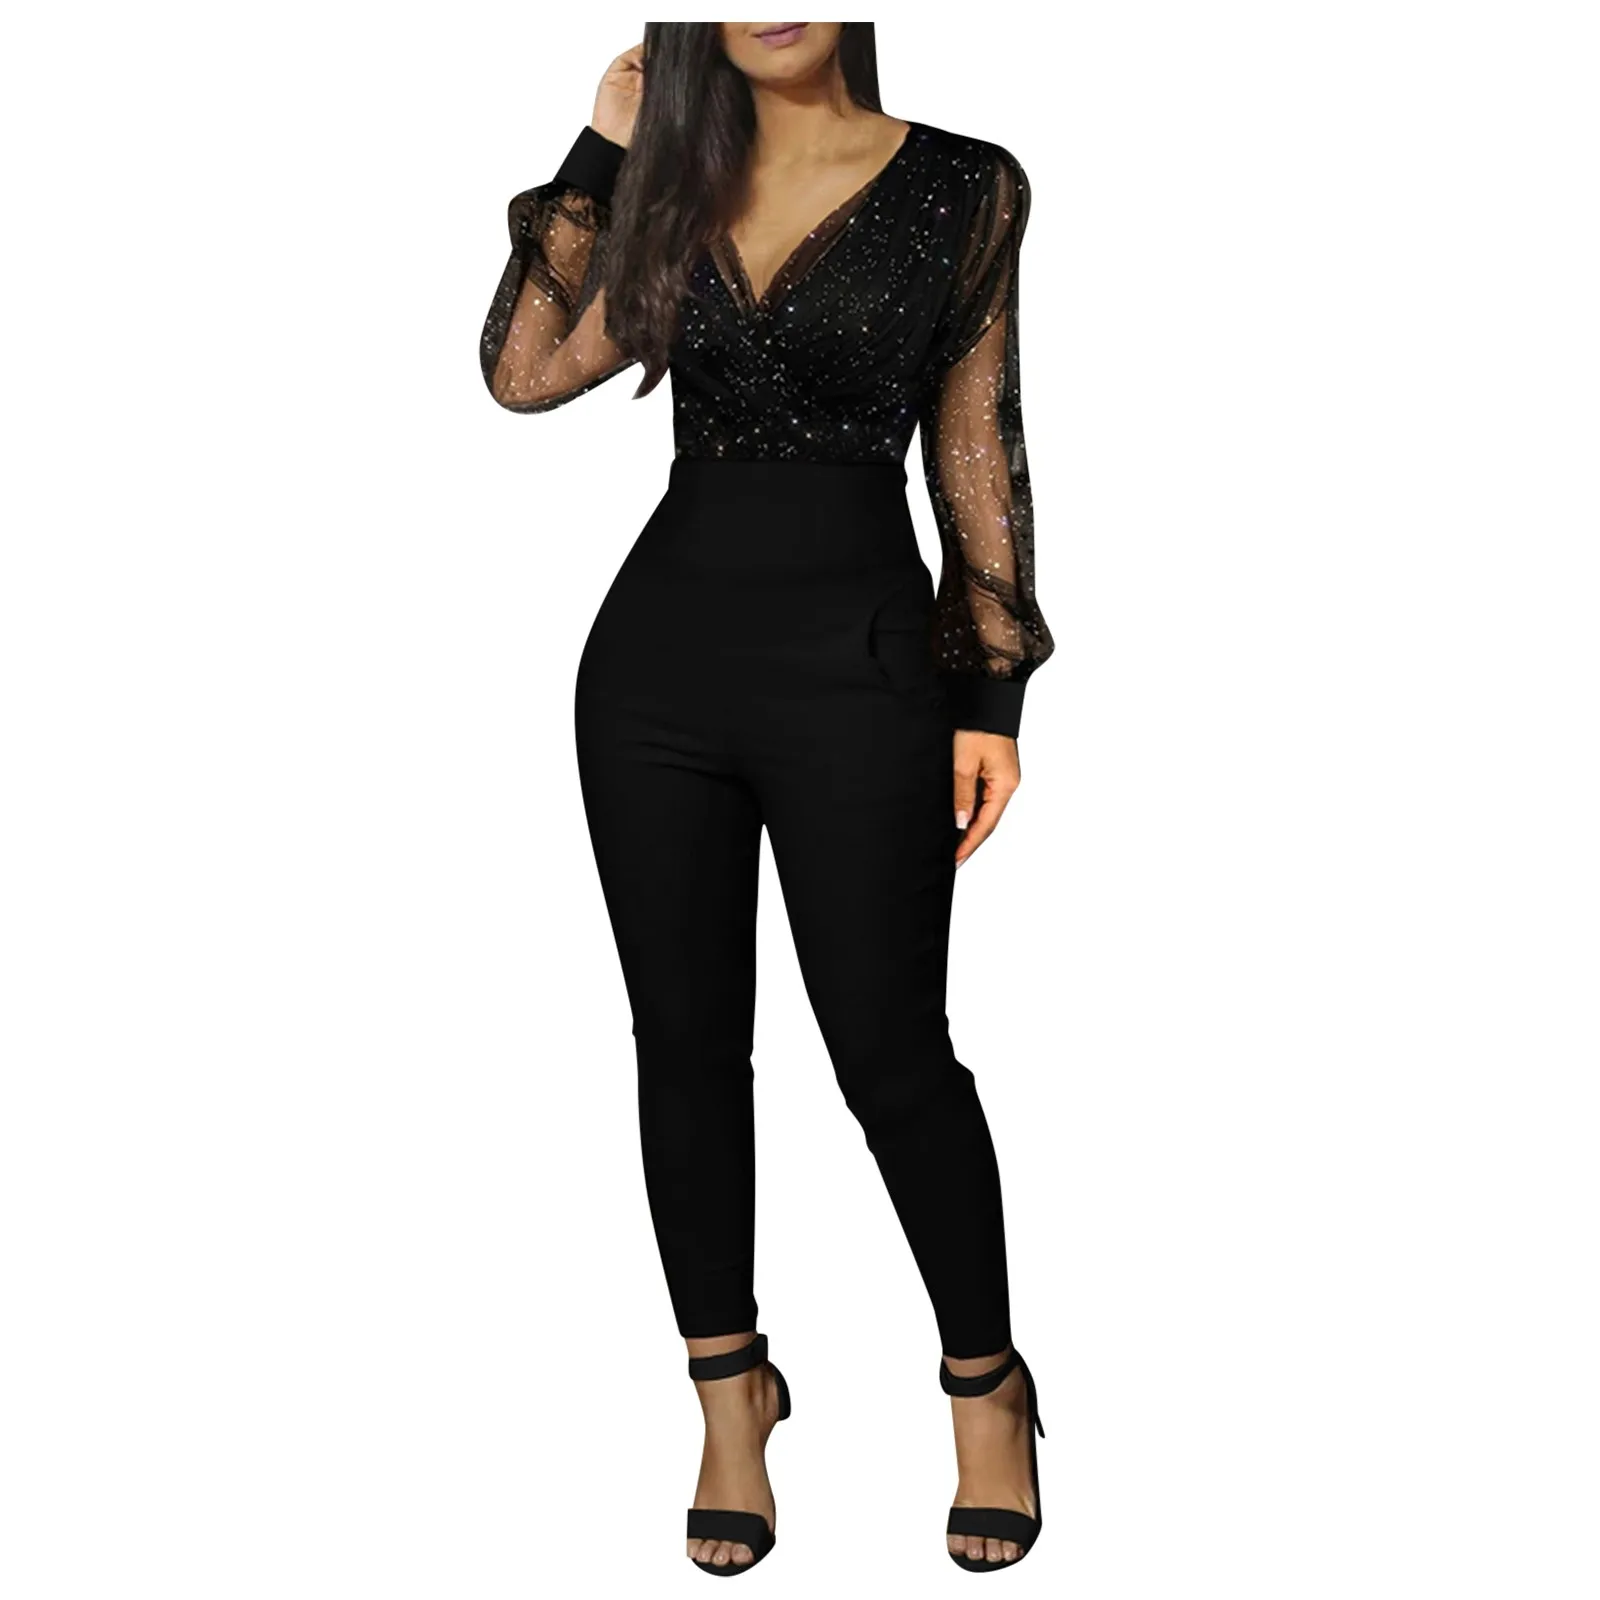 Women's Fashion V neck Sequined Mesh Glitter Party Rompers Elegant Long  Sleeve Lace Up Pocket Long Pants One Piece Jumpsuit#g3|Jumpsuits| -  AliExpress